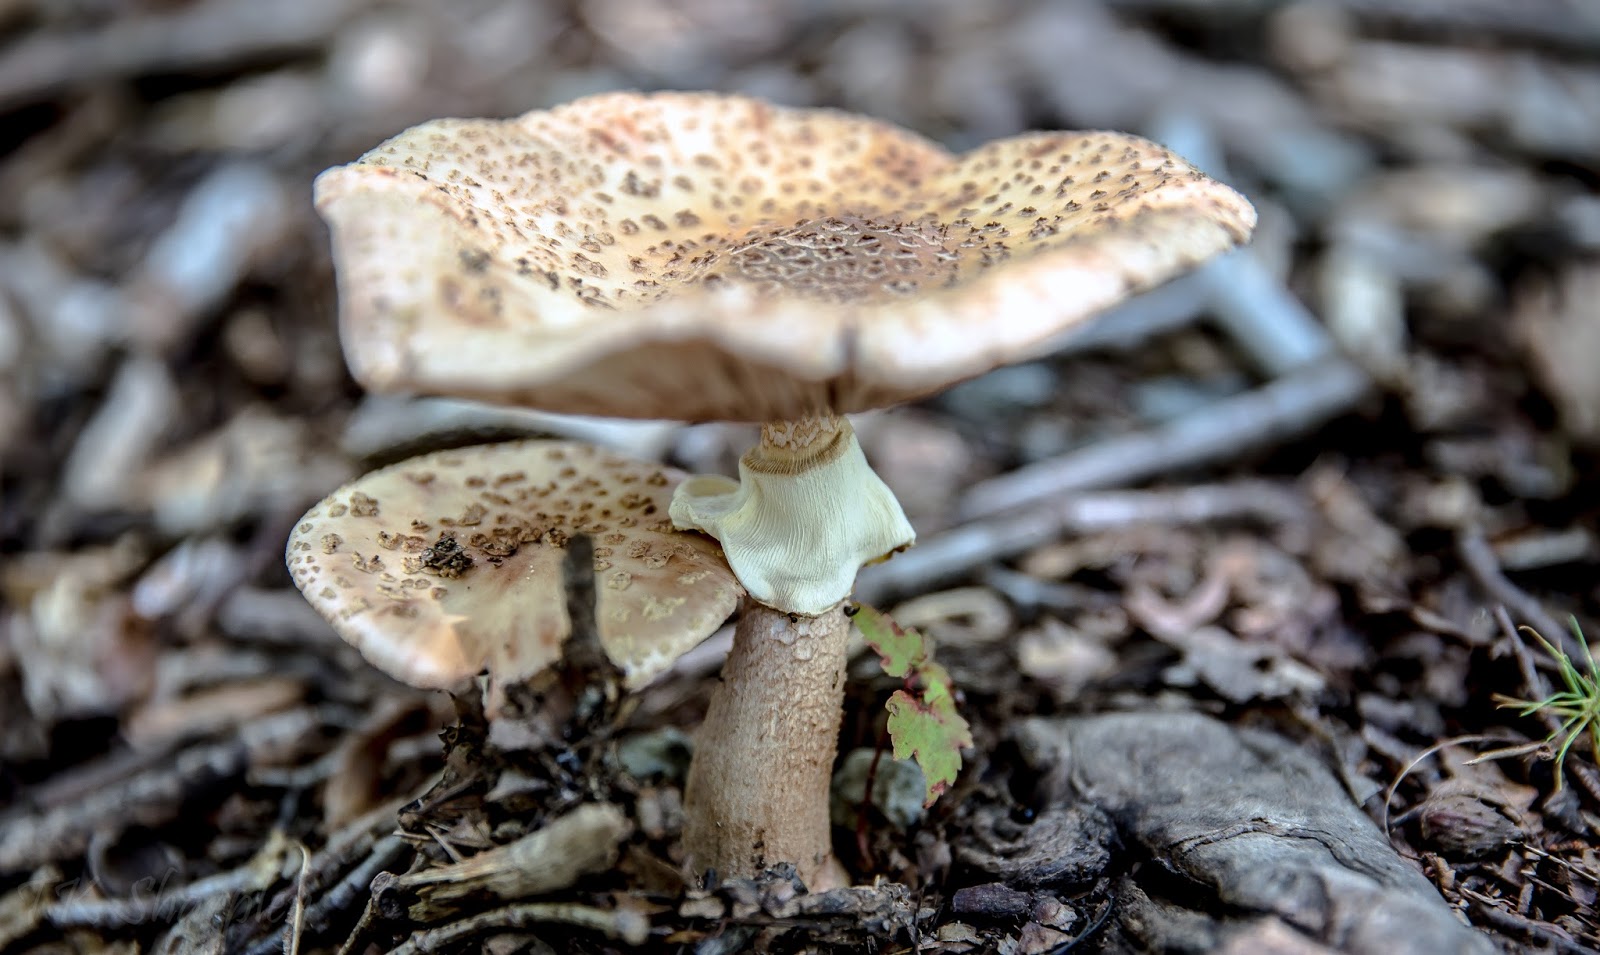 UNDER THE FLAPS: DOWN UNDER WITH THE MUSHROOMS